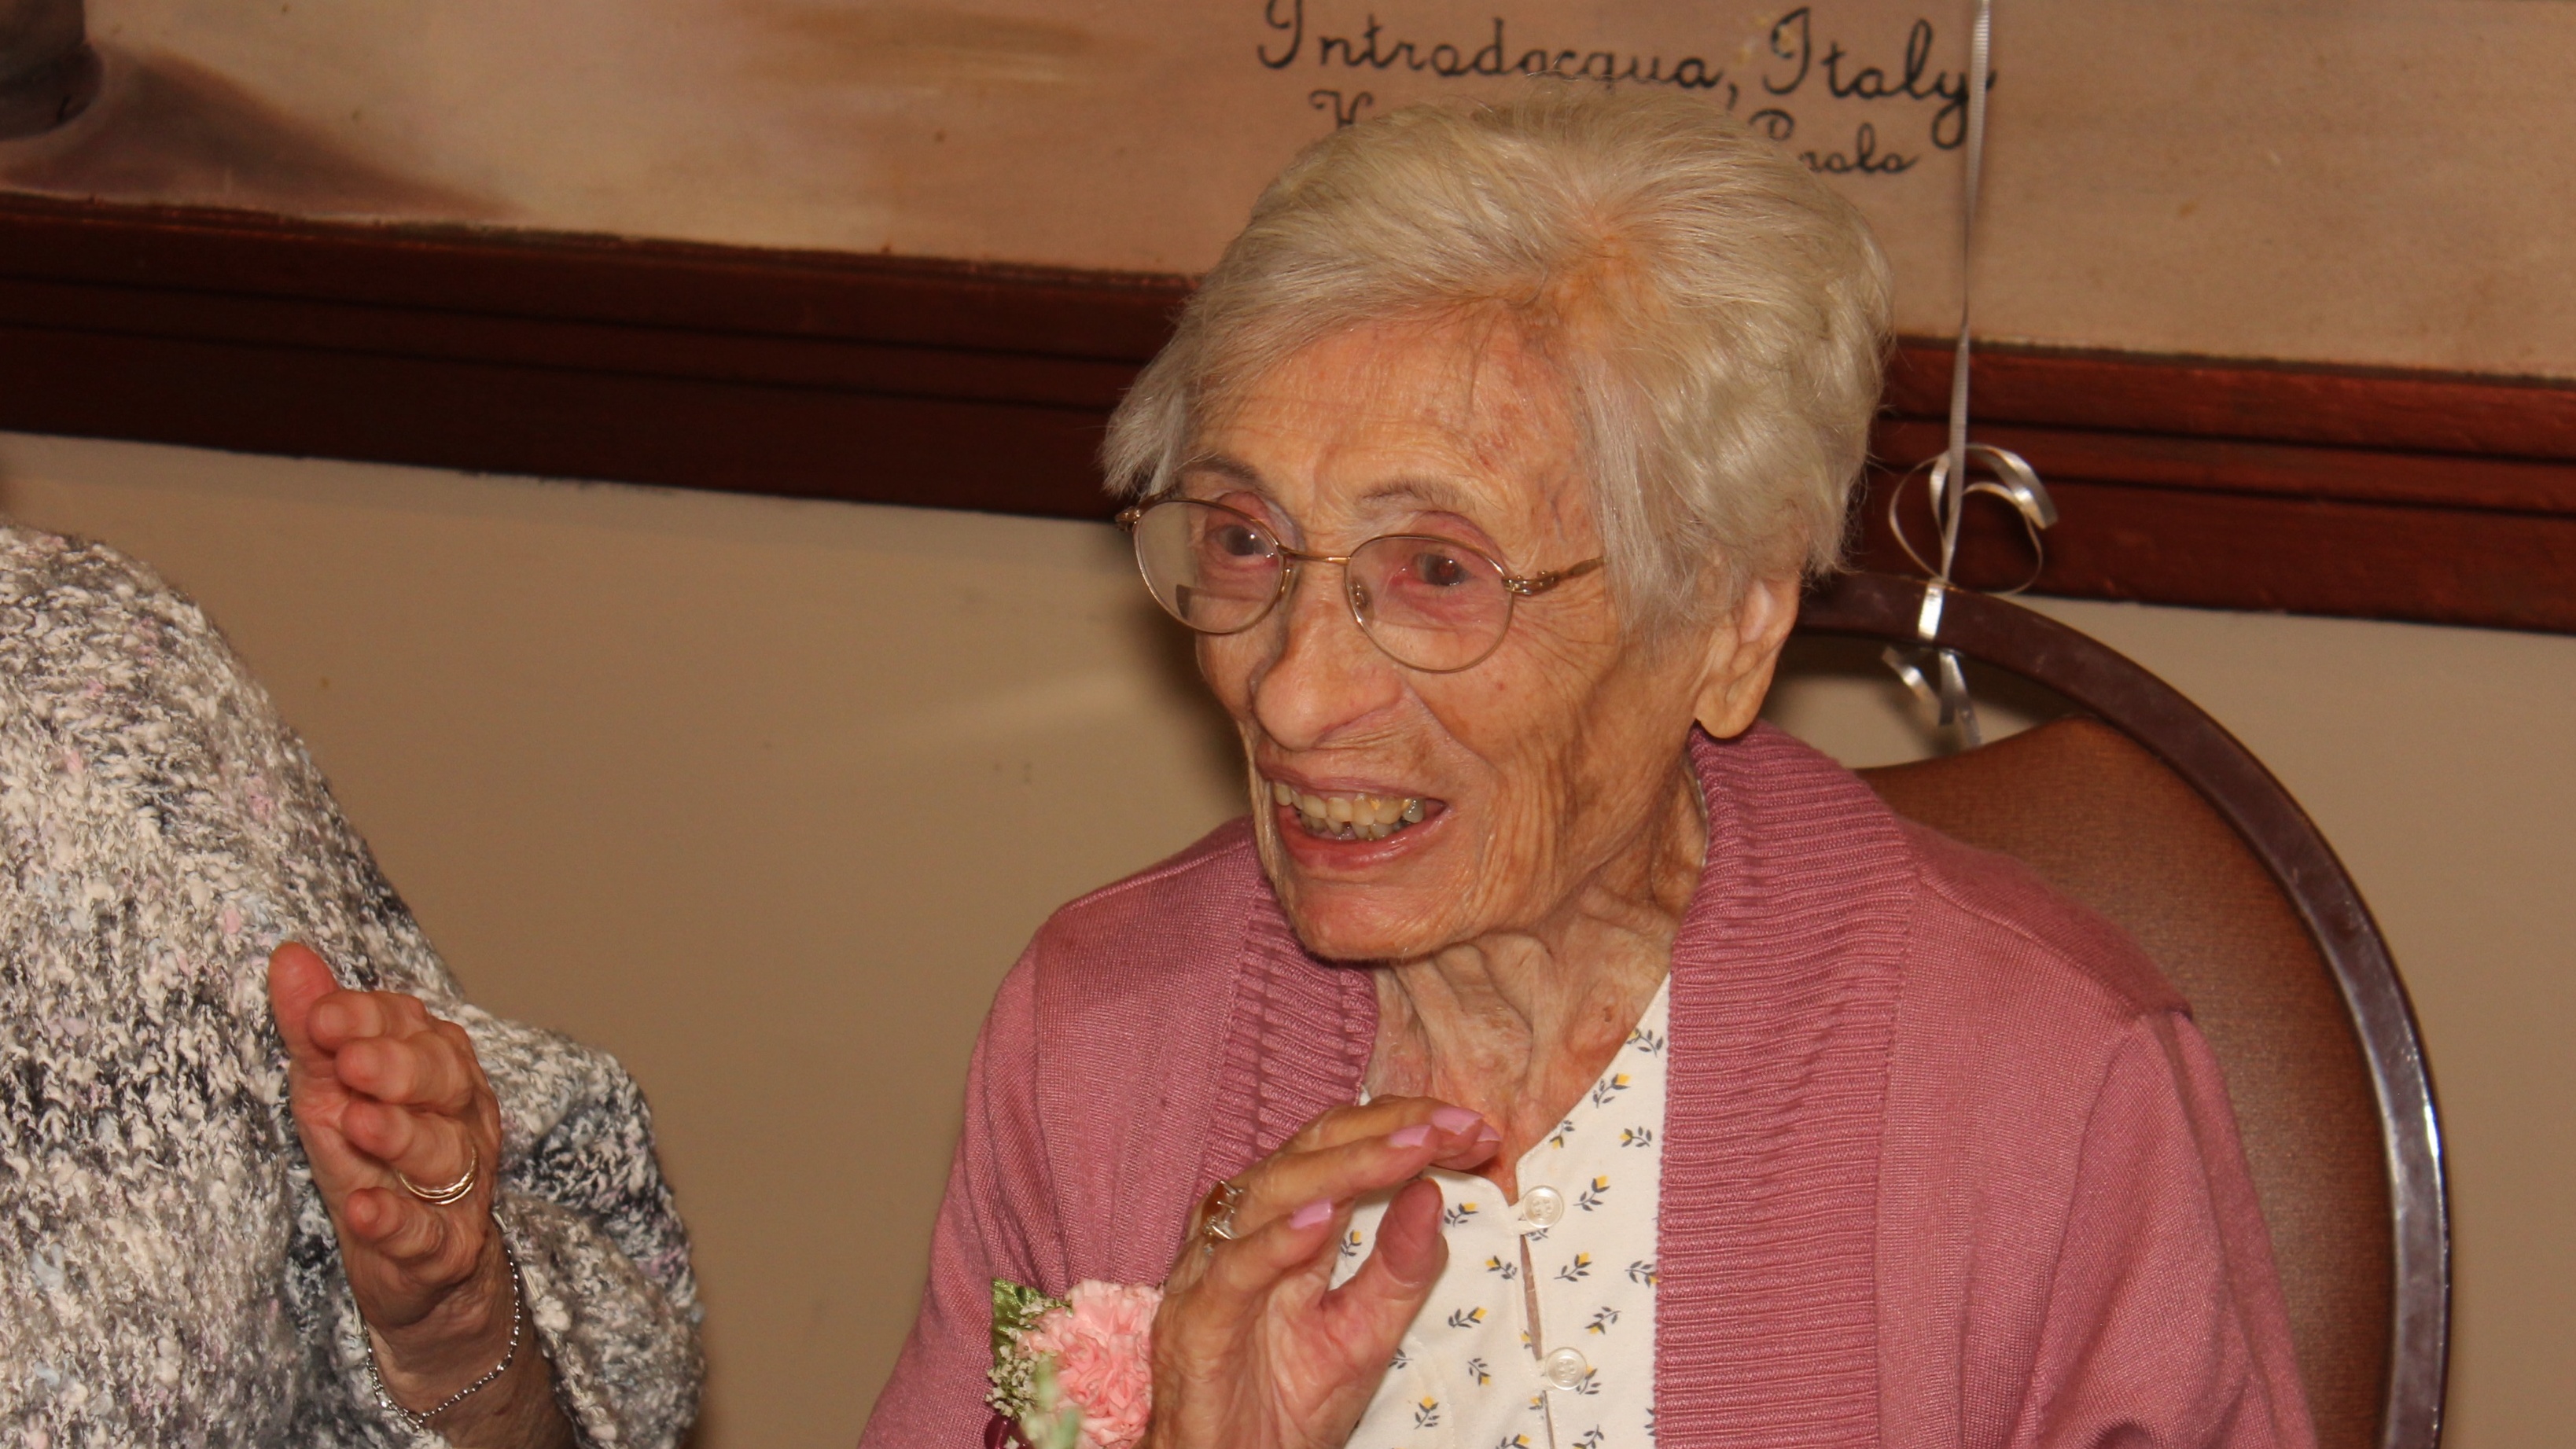 A Wish Granted to 109 year old Catherine! Image